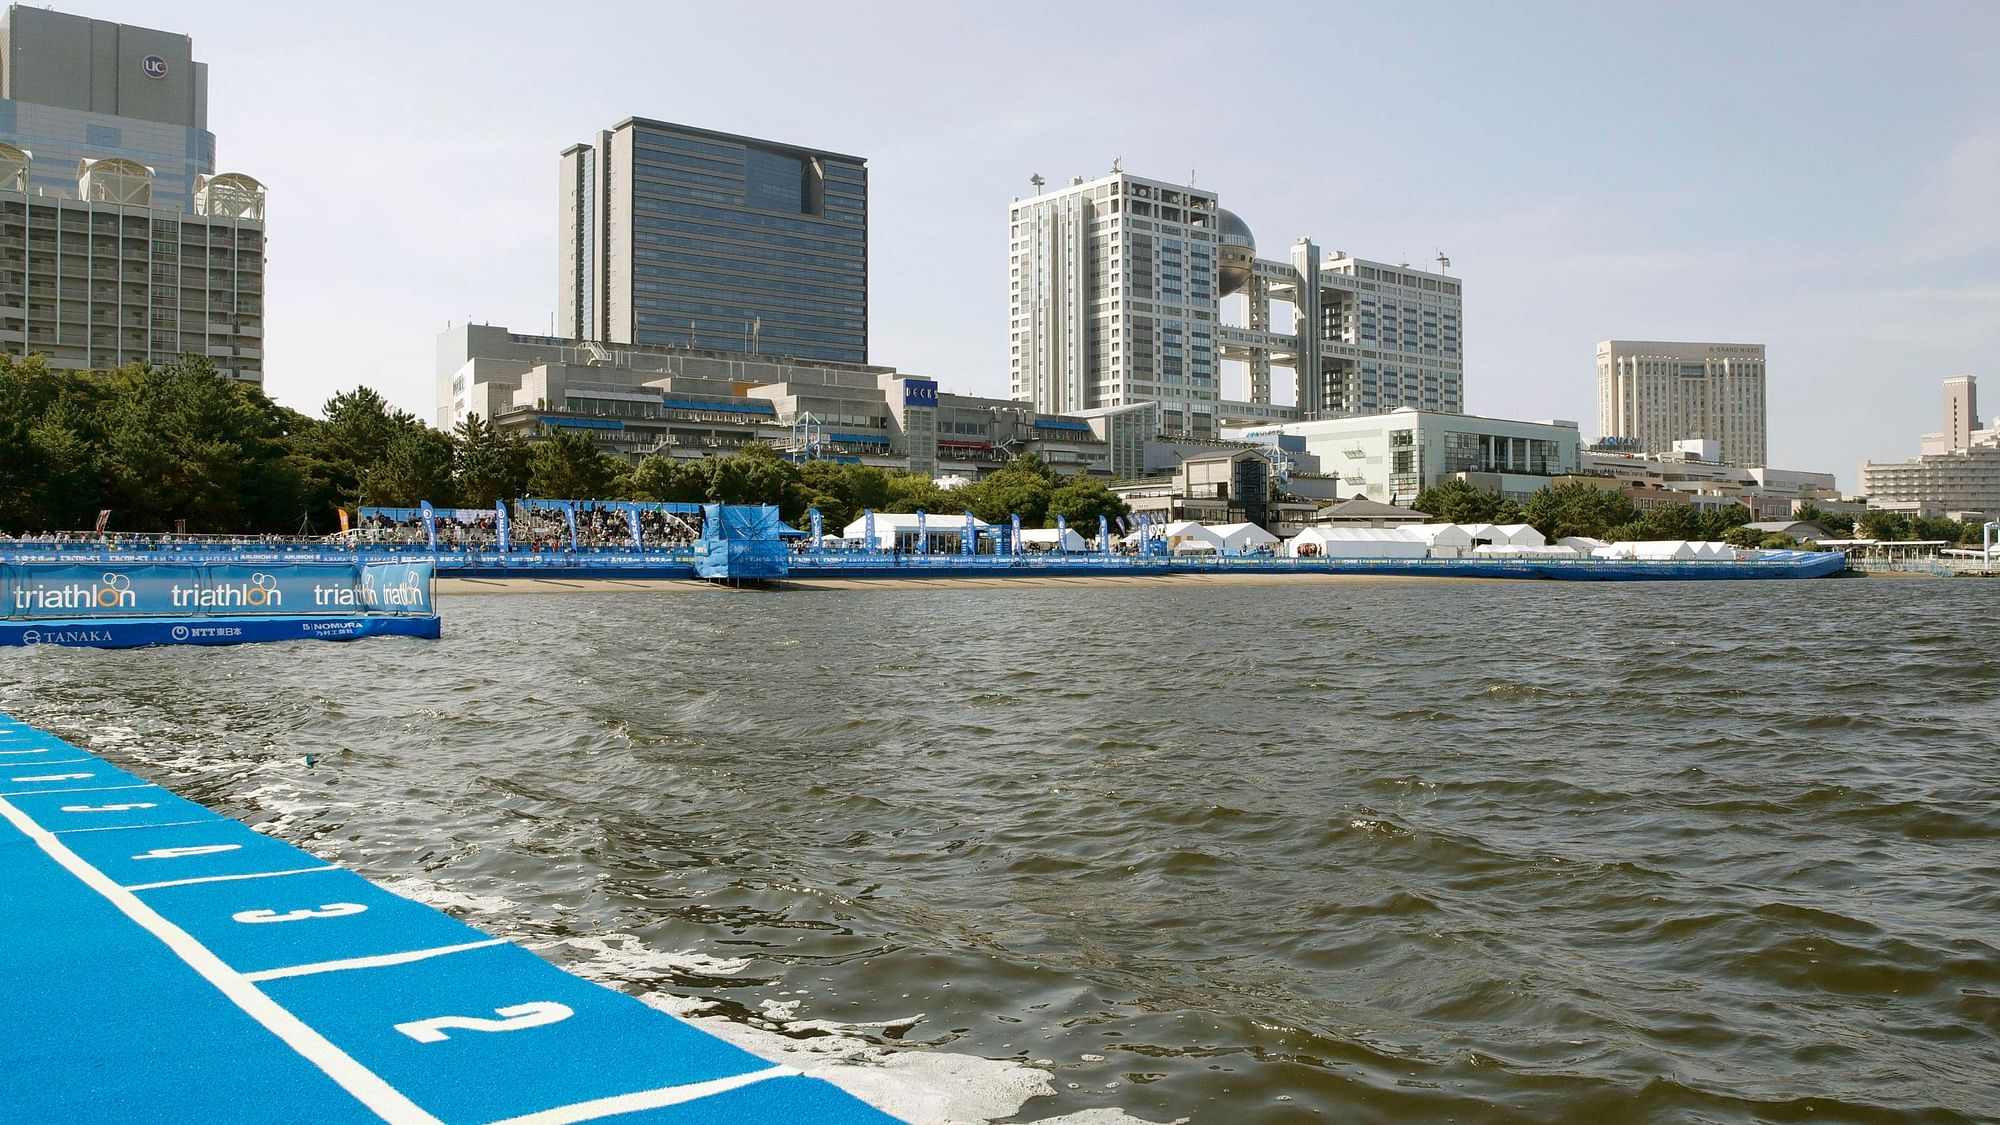 Competitors at a marathon swimming test event on Sunday complained of smelly water and high-water temperature at Odaiba Bay.